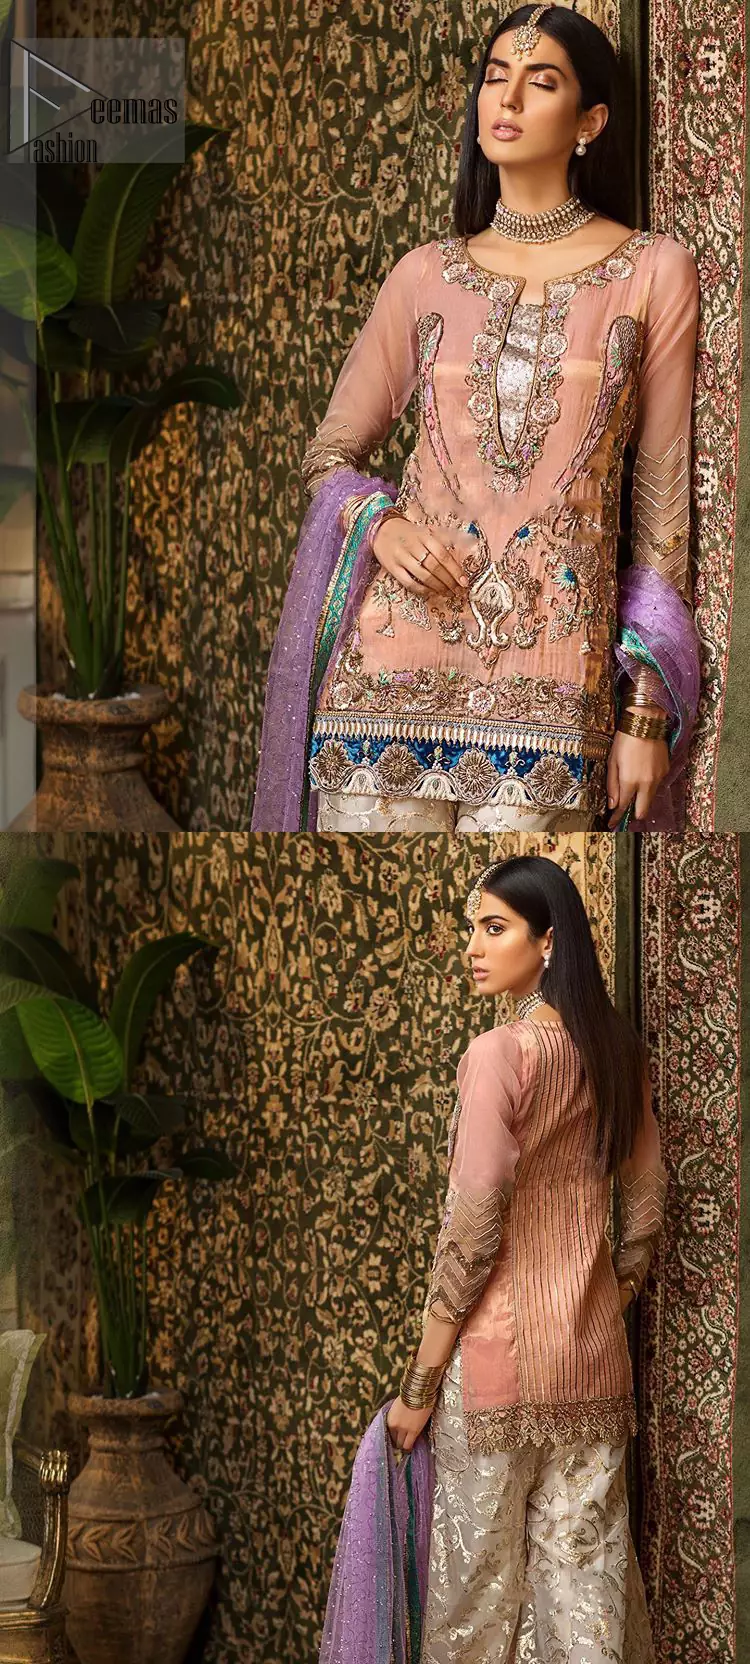 Add some super cool twist to your look with this outfit on your nikah. Gussy up in this luxuriously designed shirt emboldened with intricate embroidery along with beautiful rich patterns and delicate applique details at the daaman. Furthermore this super stunning shirt is made of rich floral embroidery which is further enhanced with zardosi work. Having full length sleeves adorned with scalloped finishing. Style it up with artfully coordinated ivory sharara finessed with lace and applique details at the bottom. The outfit is beautifully coordinated with light purple dupatta with embellished lace borders on all four sides and scattered sequins all over.